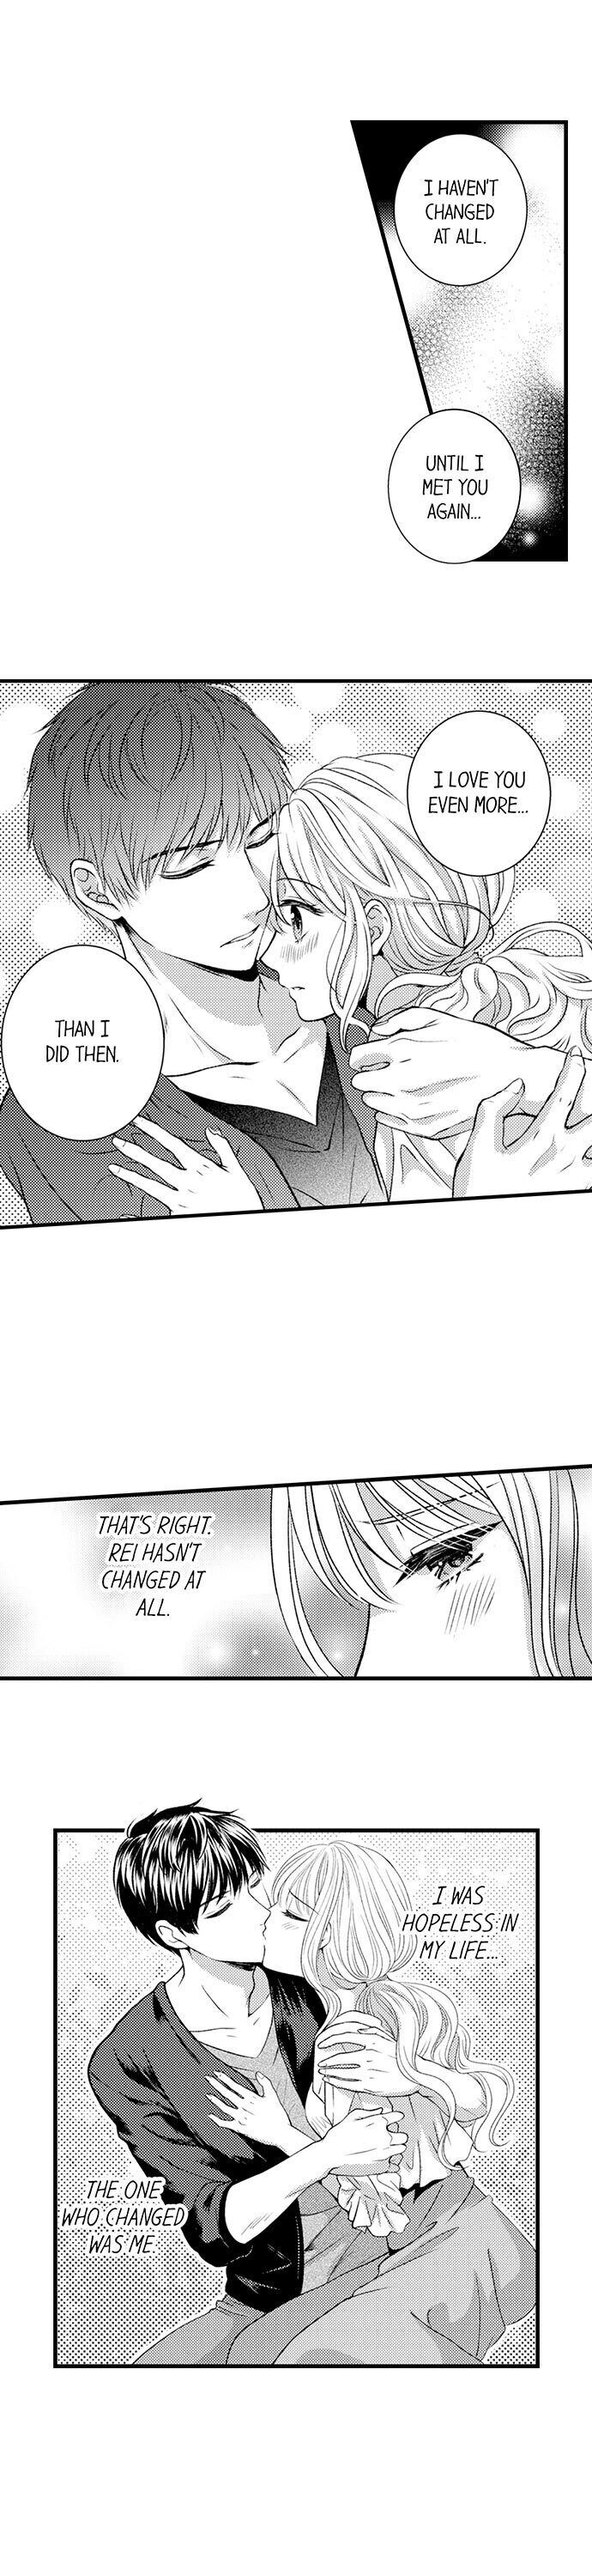 Cheating in a One-Sided Relationship - Chapter 14 Page 16